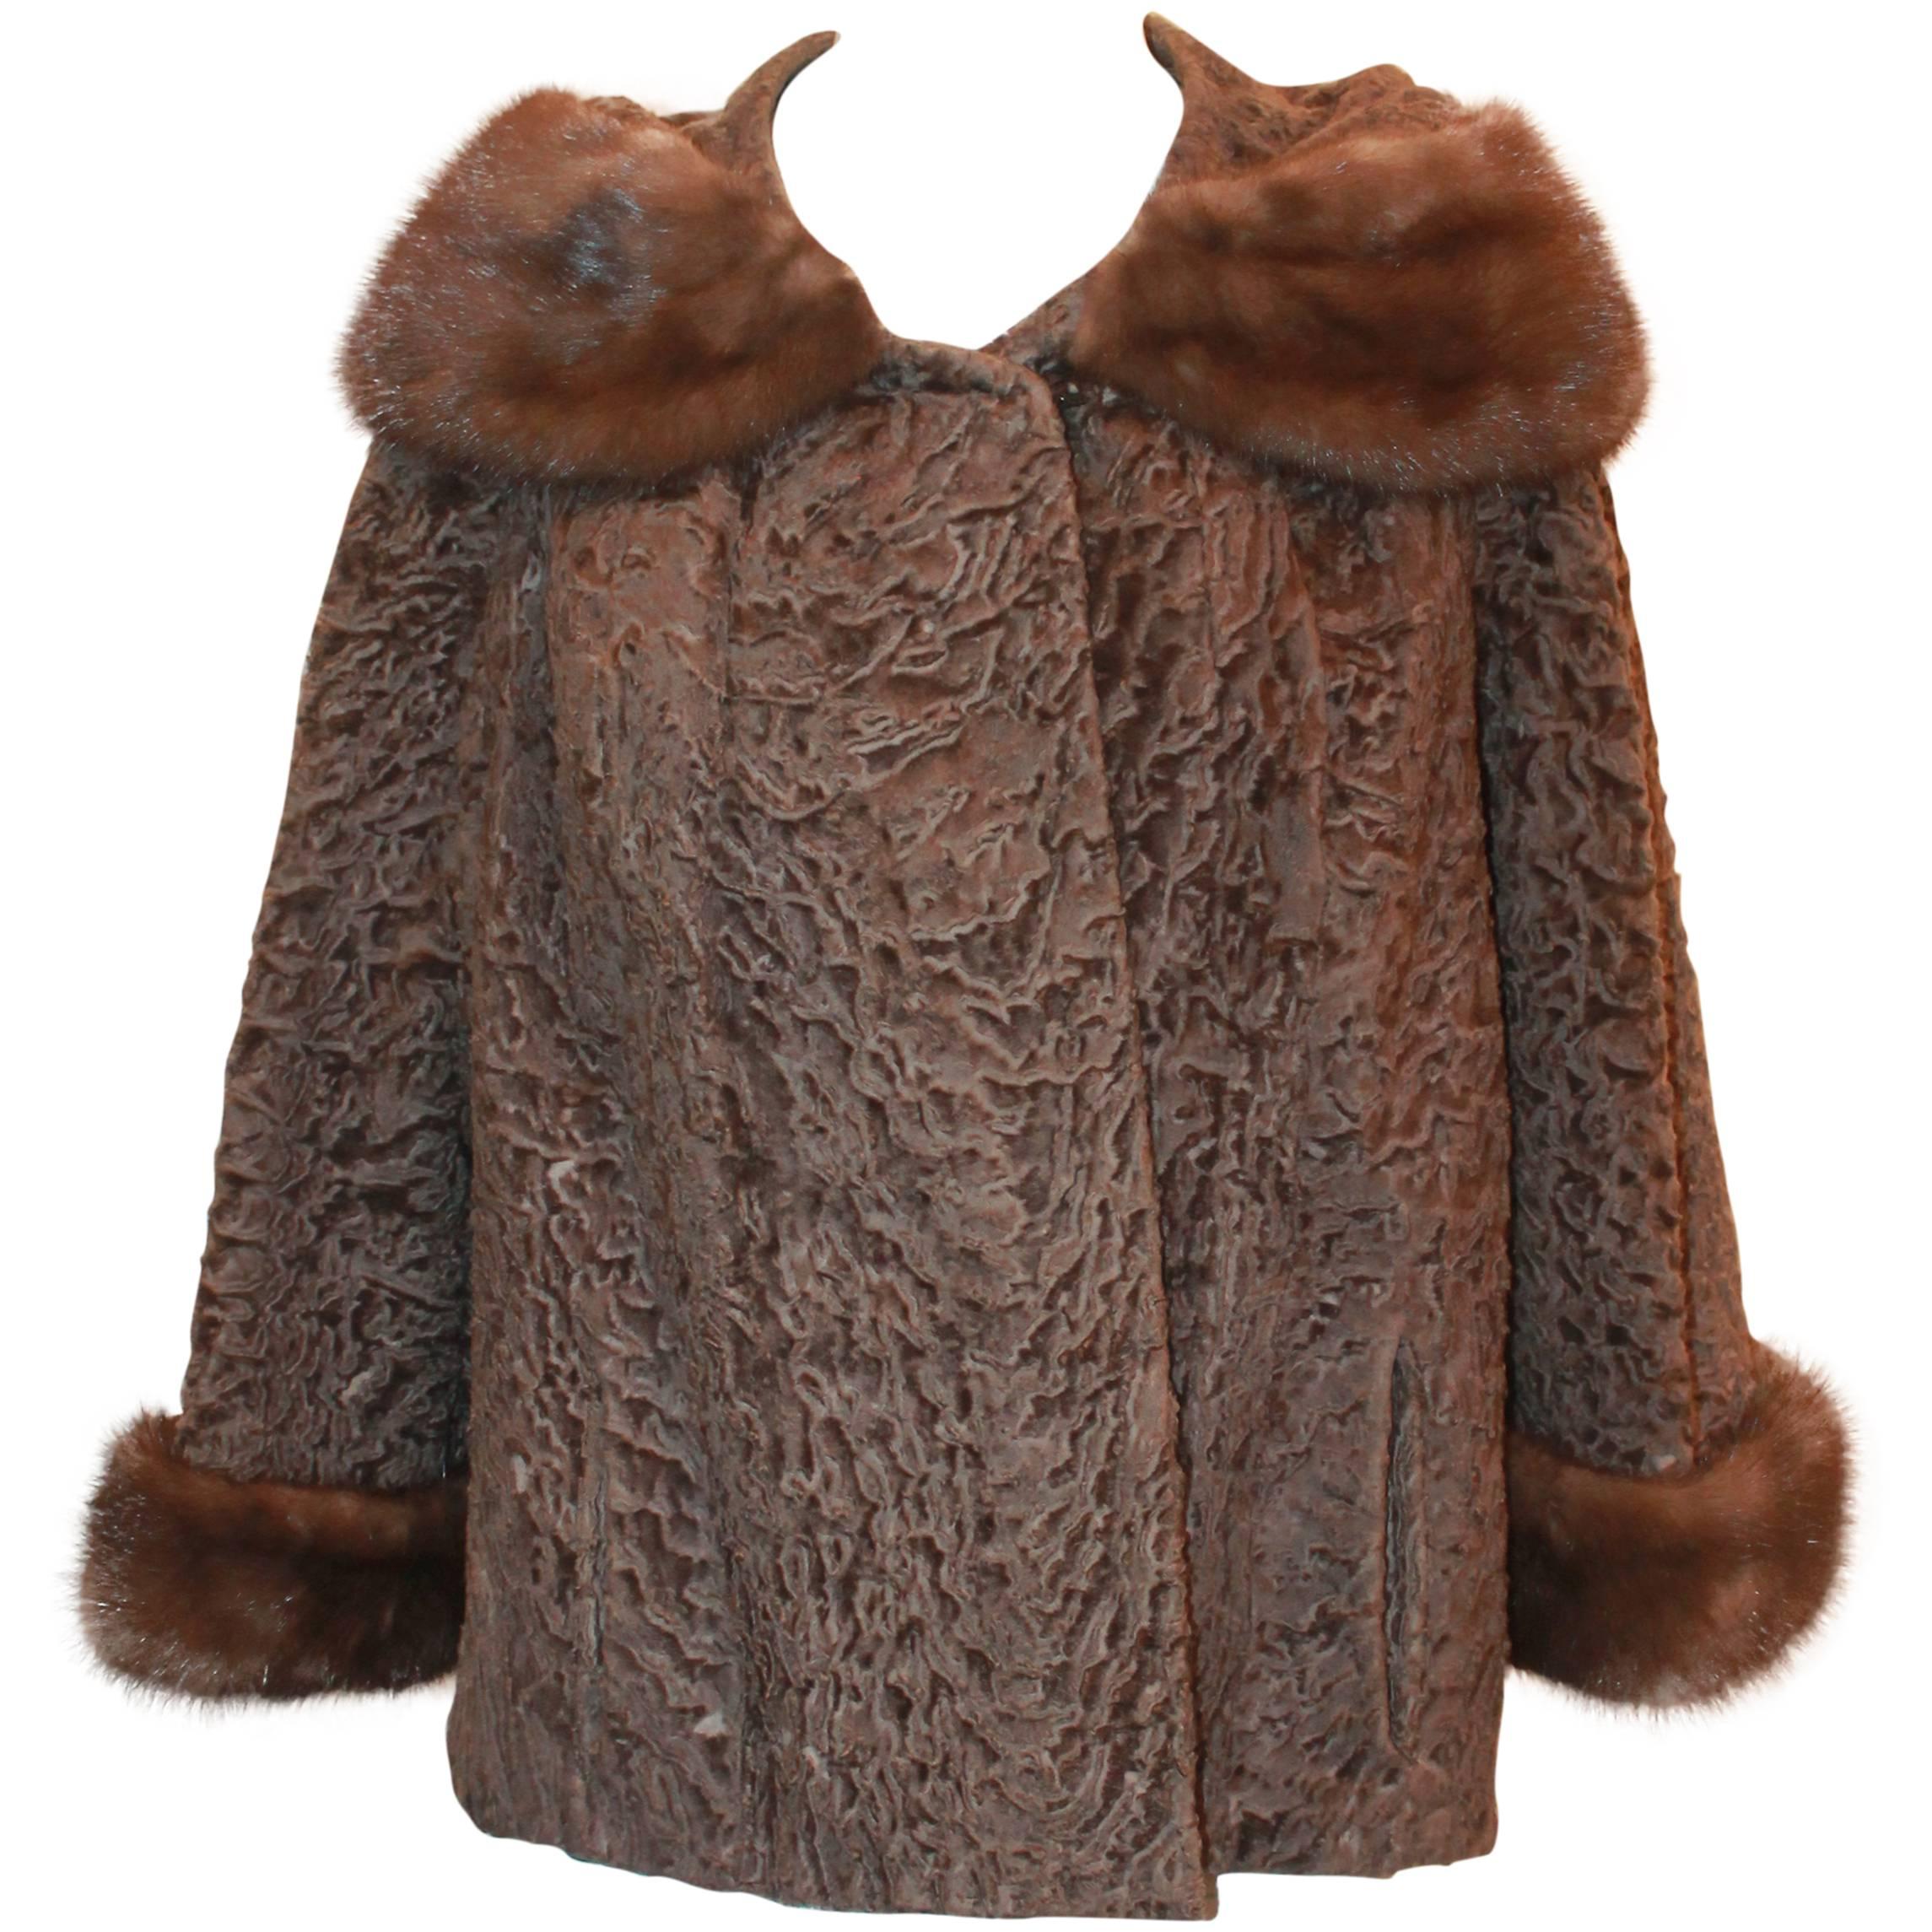 Vintage Brown Persian Lamb Jacket with Mink Collar & Cuffs - M